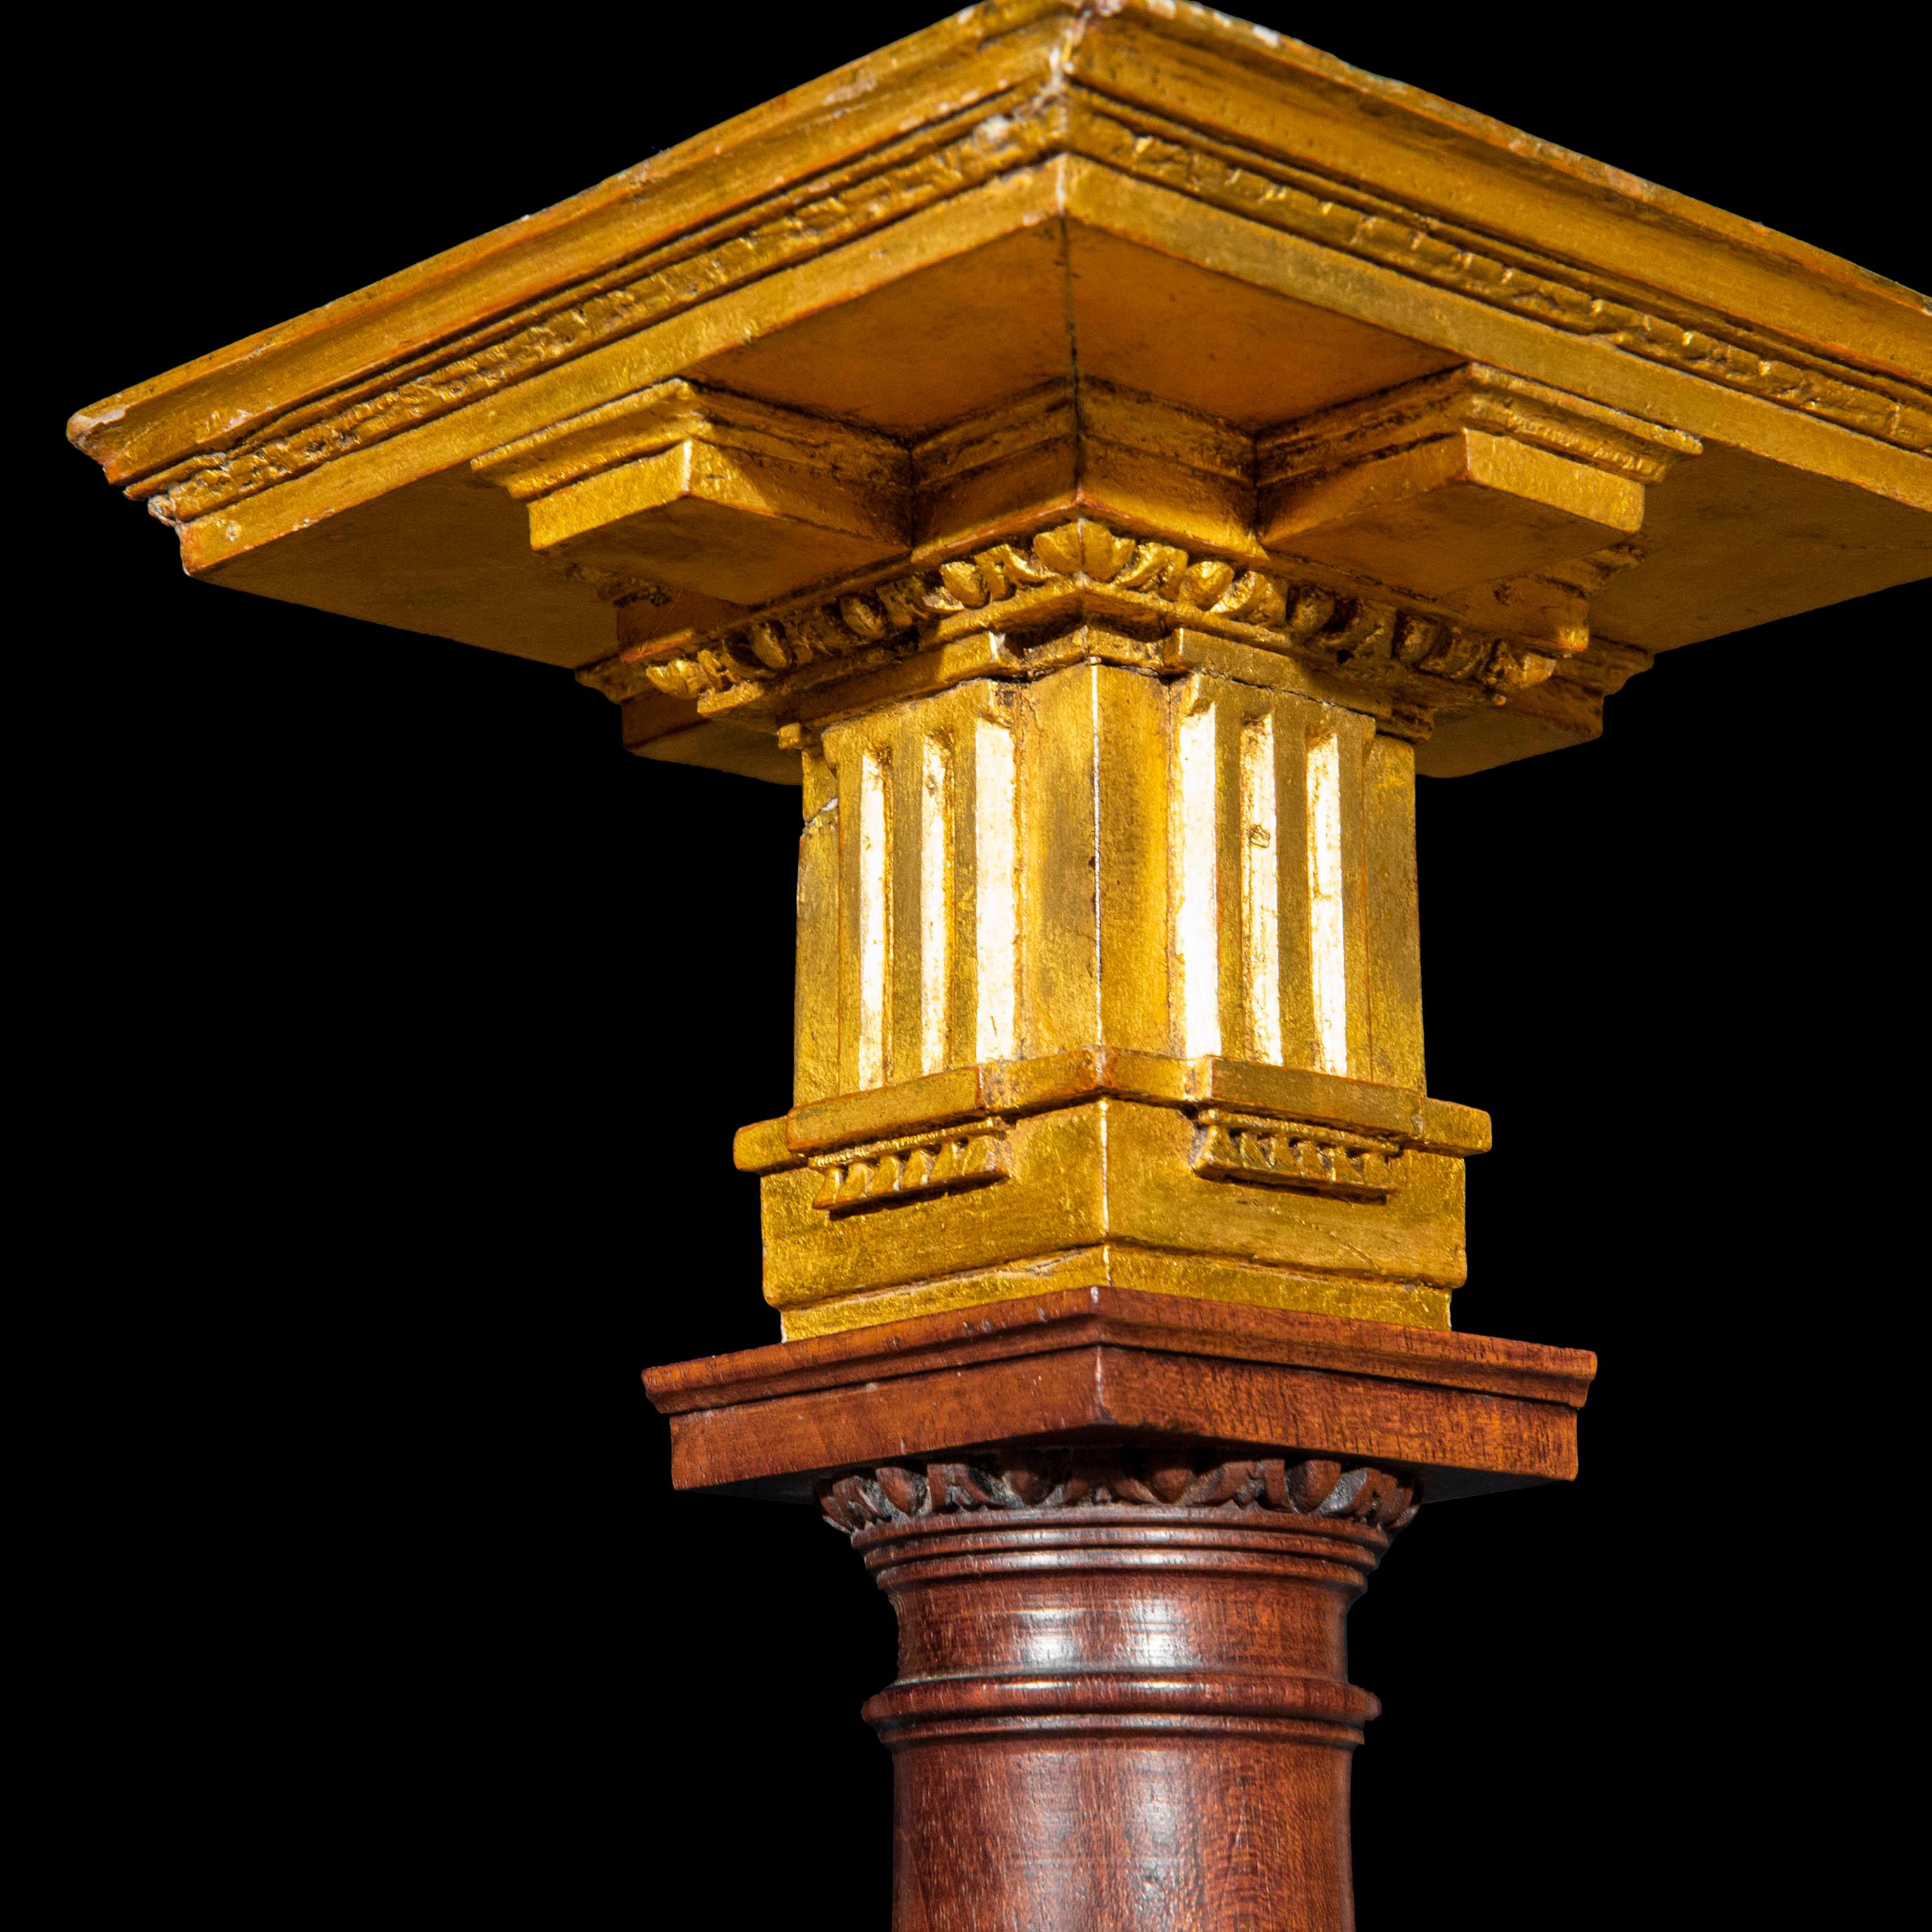 An extremely rare, exquisite architectural model of a Doric column
England, third quarter of 18th century.

Why we like it
Exquisitely carved and having accents picked out in gold, this extremely rare survivor from the golden era of Classical